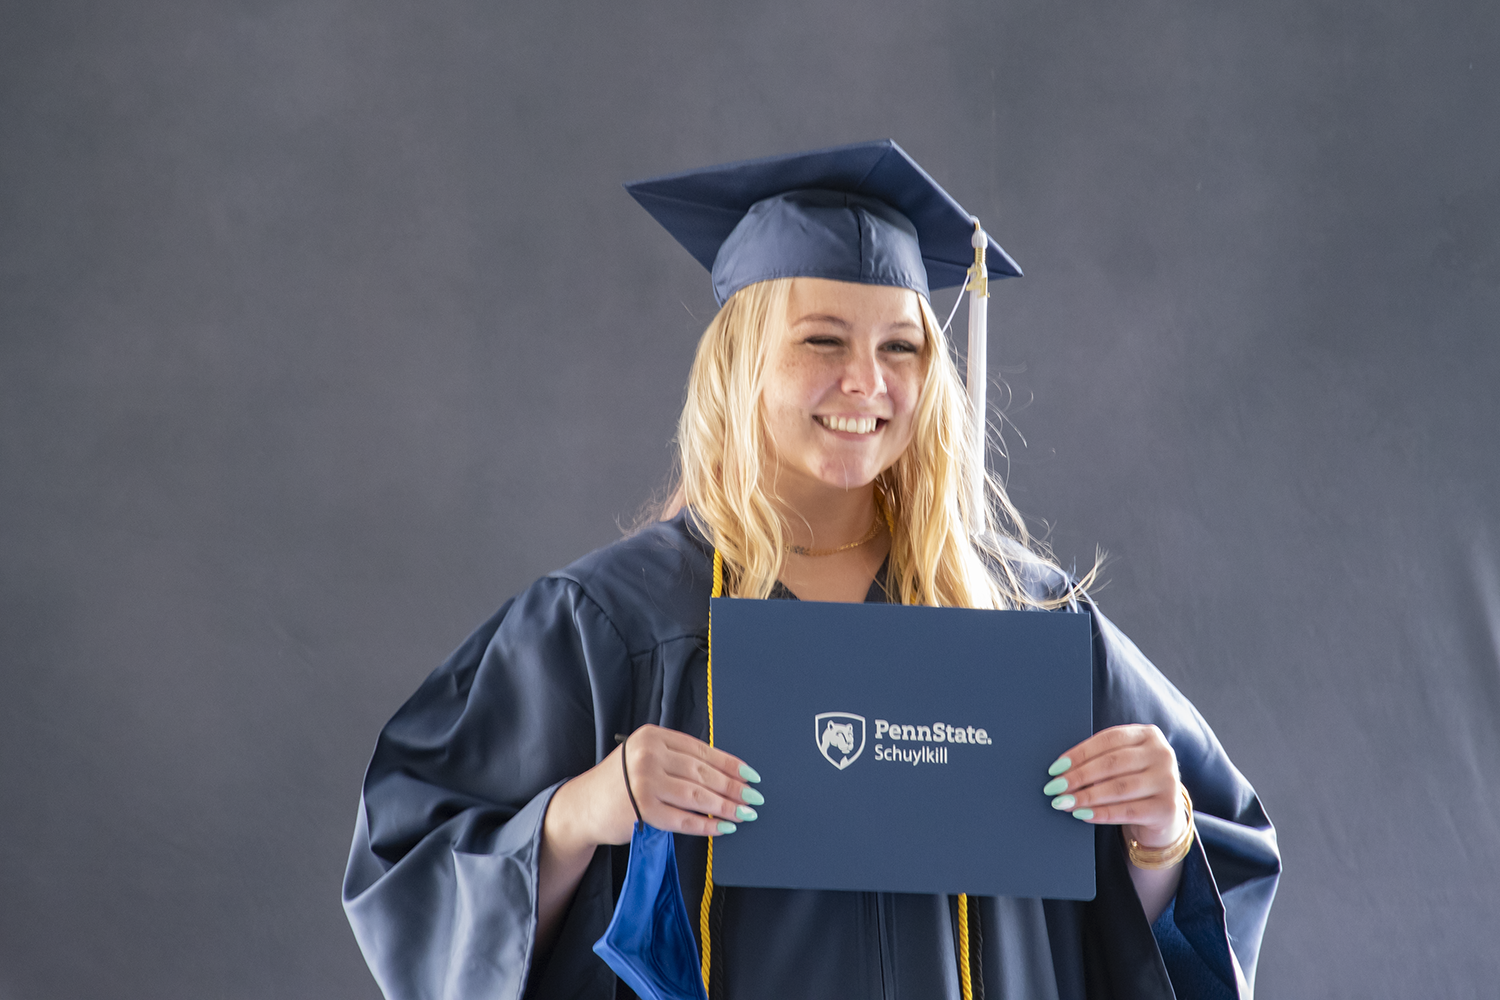 Penn State Schuylkill Spring 2021 Commencement Ceremony Image Gallery